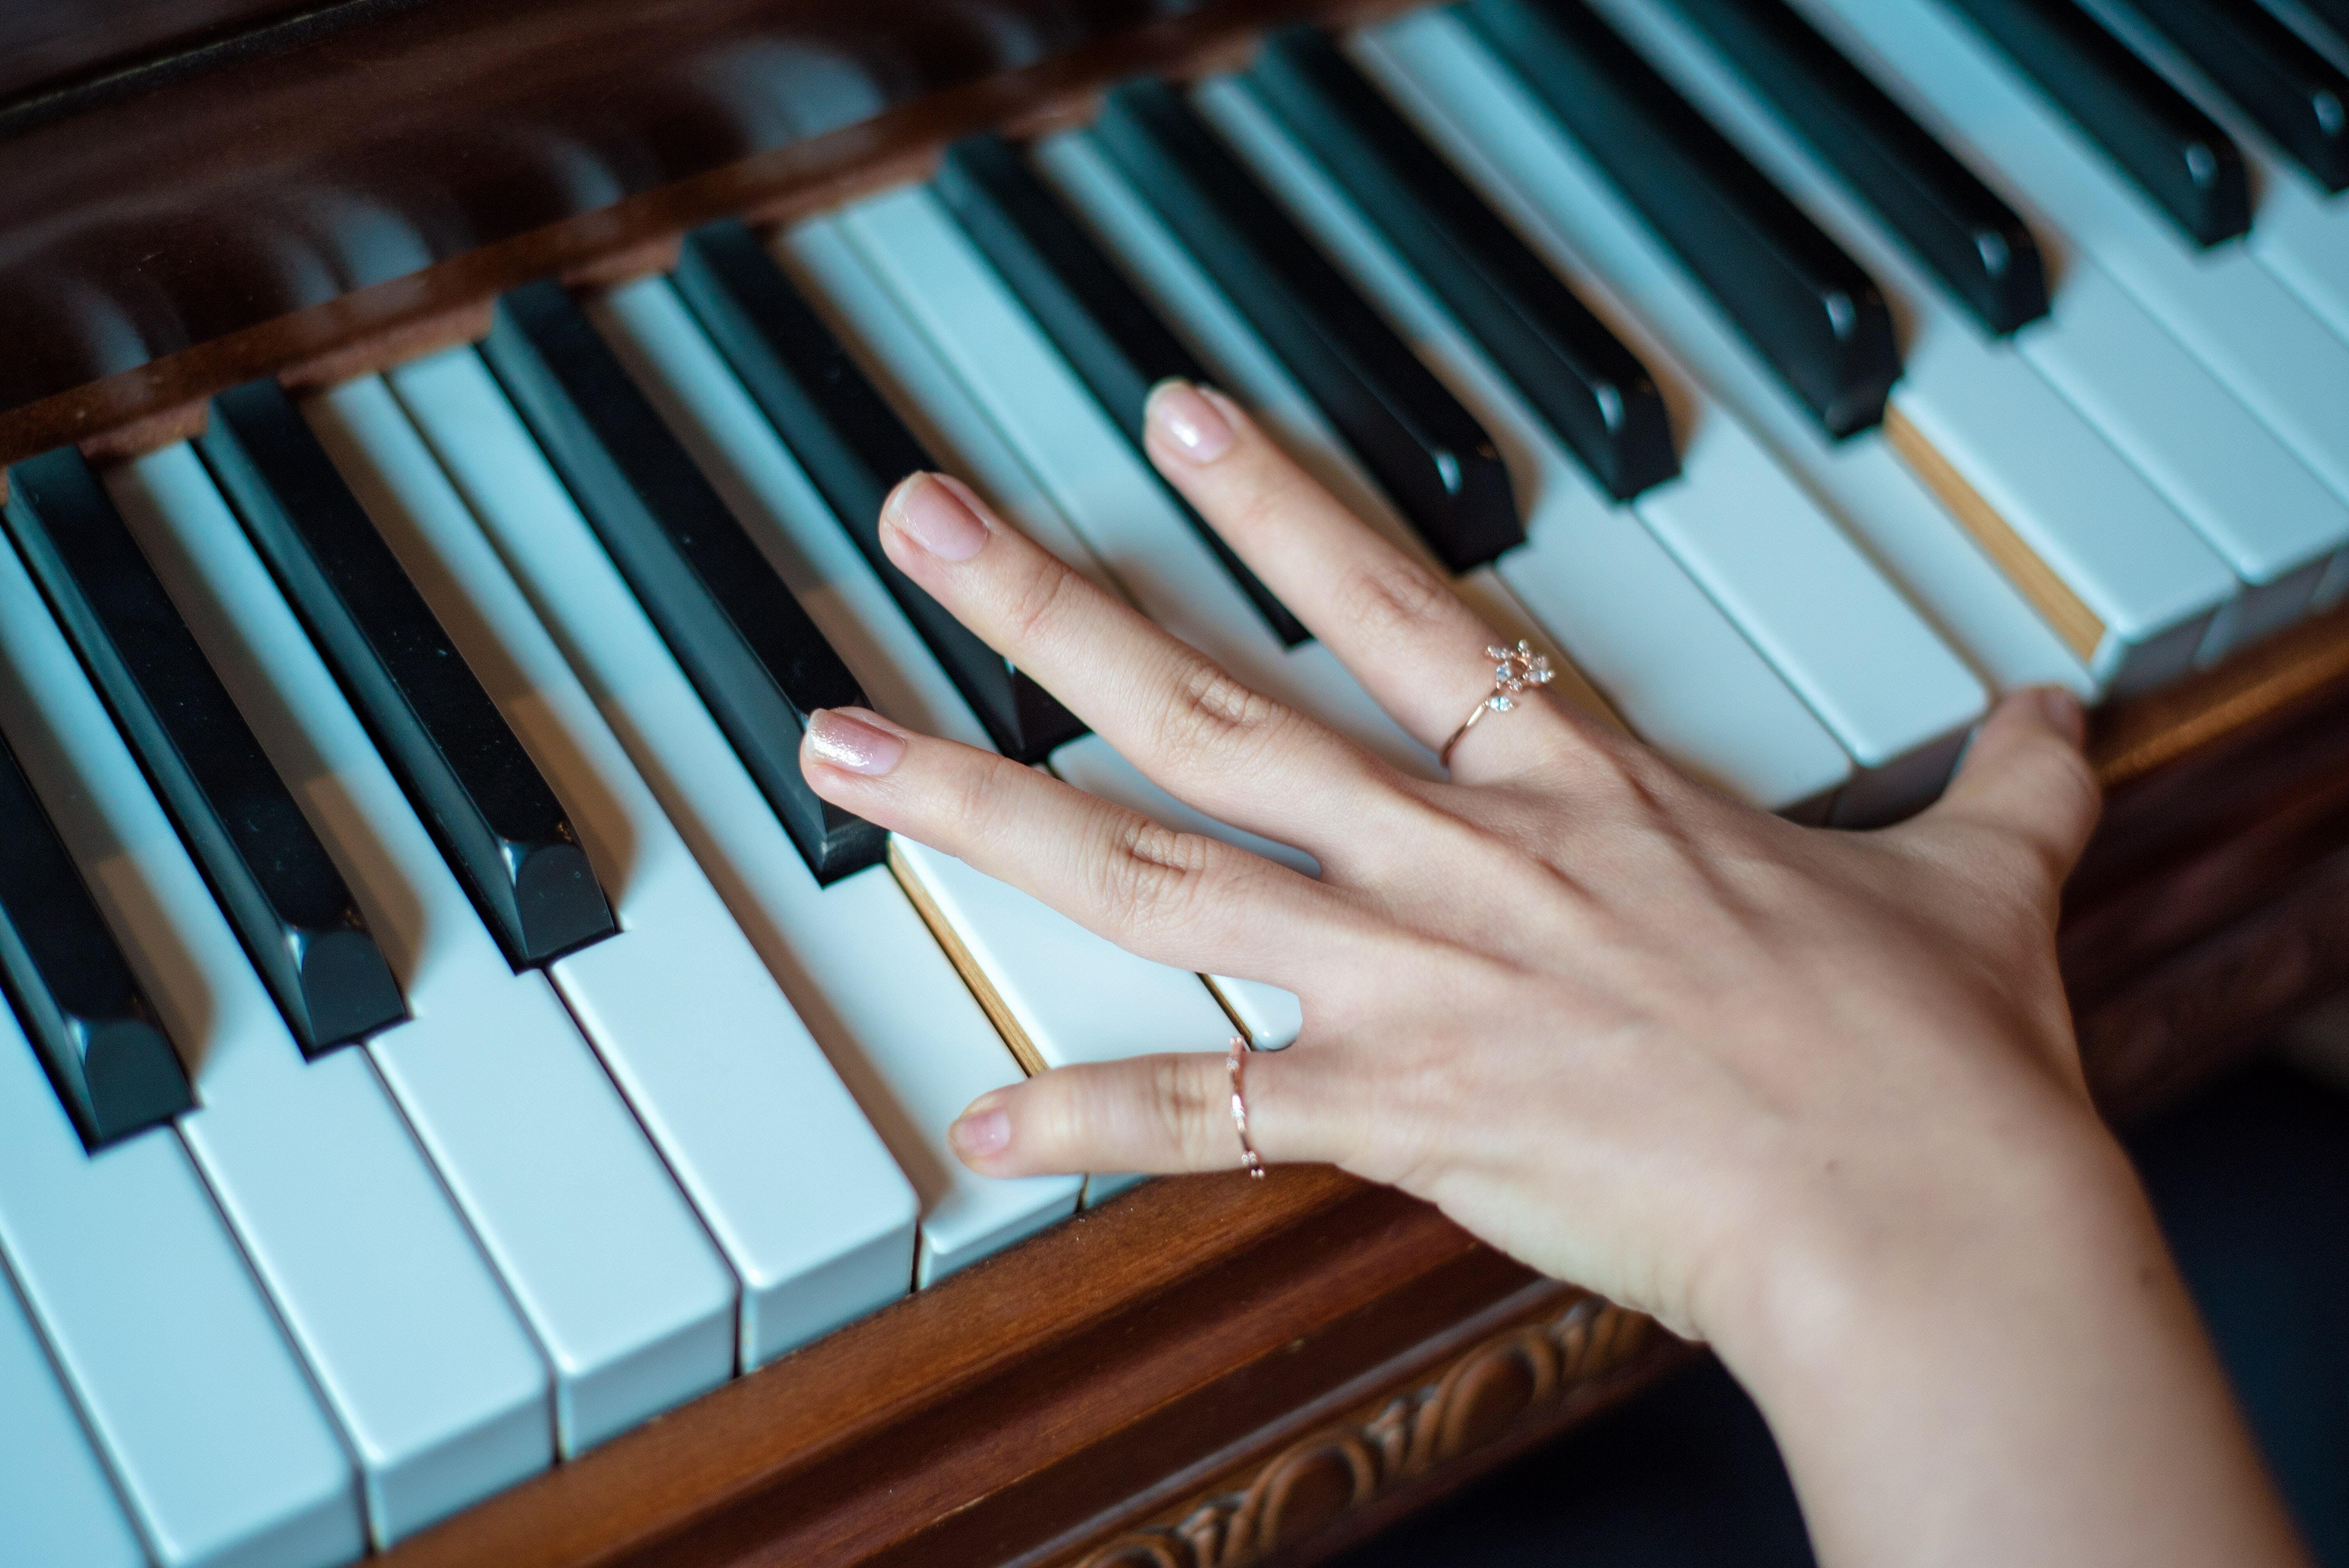 Fingers on piano